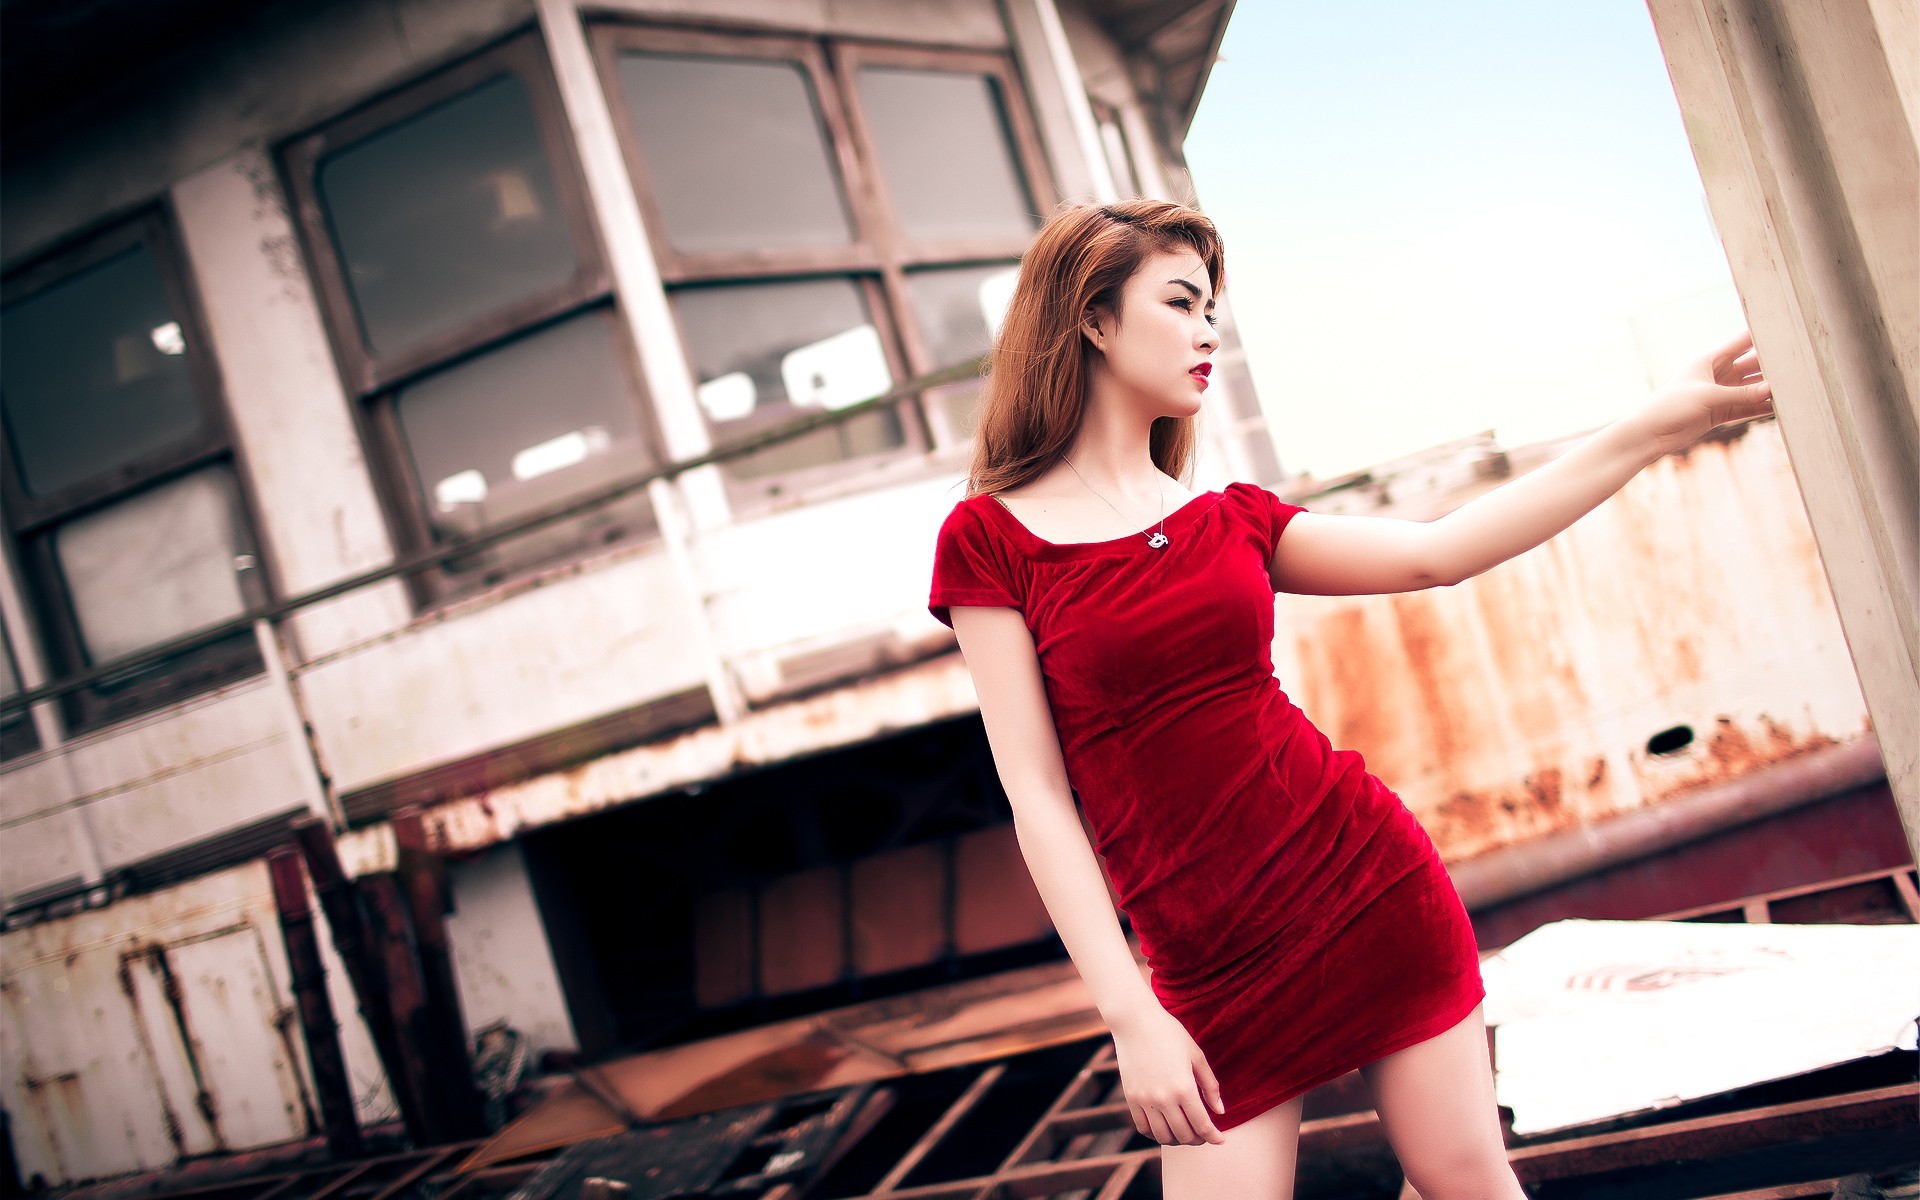 People 1920x1200 women long hair women outdoors redhead Asian red dress minidress open mouth industrial building model standing looking away necklace makeup red lipstick